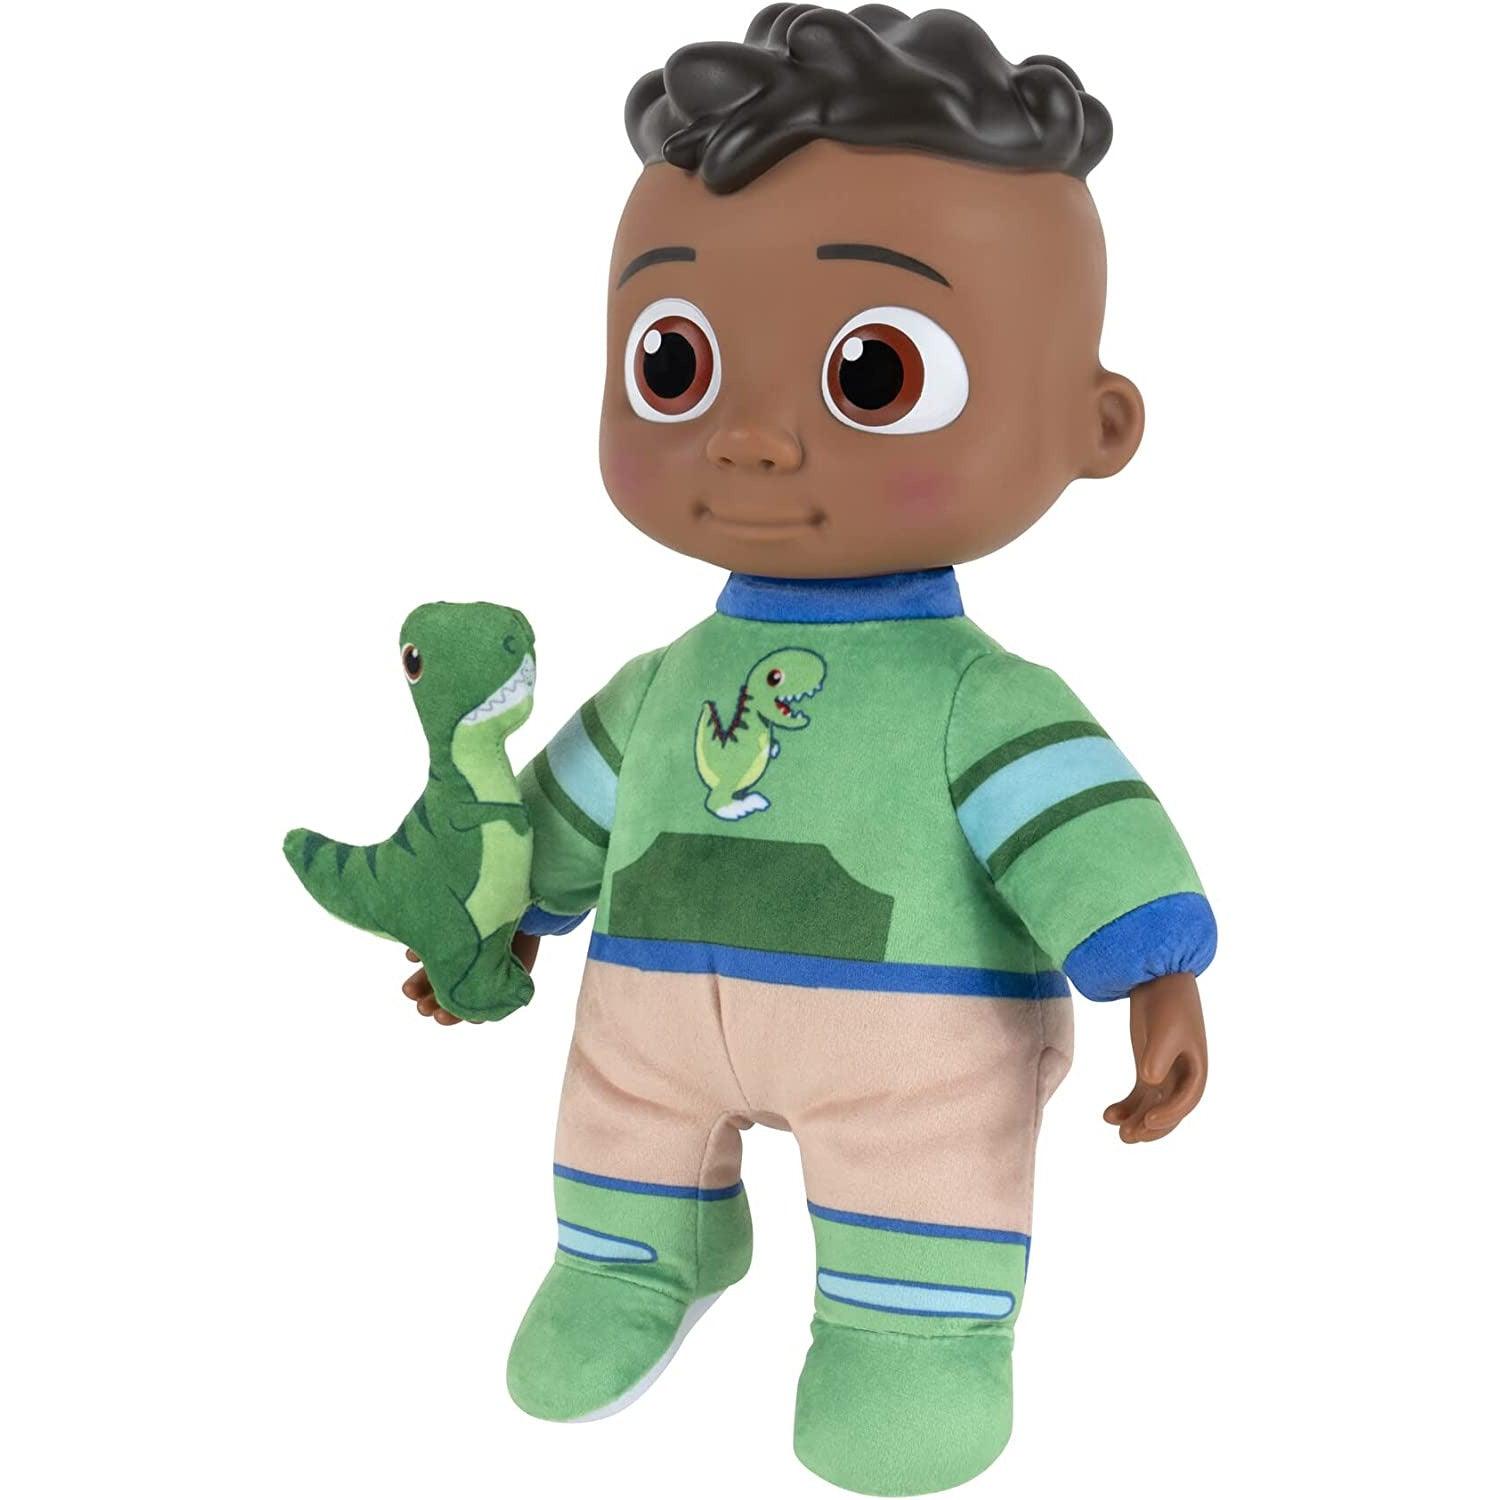 CoComelon My Friend Cody with Dinosaur Plush - Plays ‘Cody’s Special Dinosaur Day’ Song Clips - BumbleToys - 0-24 Months, Action Figures, Boys, Cocomelon, Musical Instruments, OXE, plush, Pre-Order